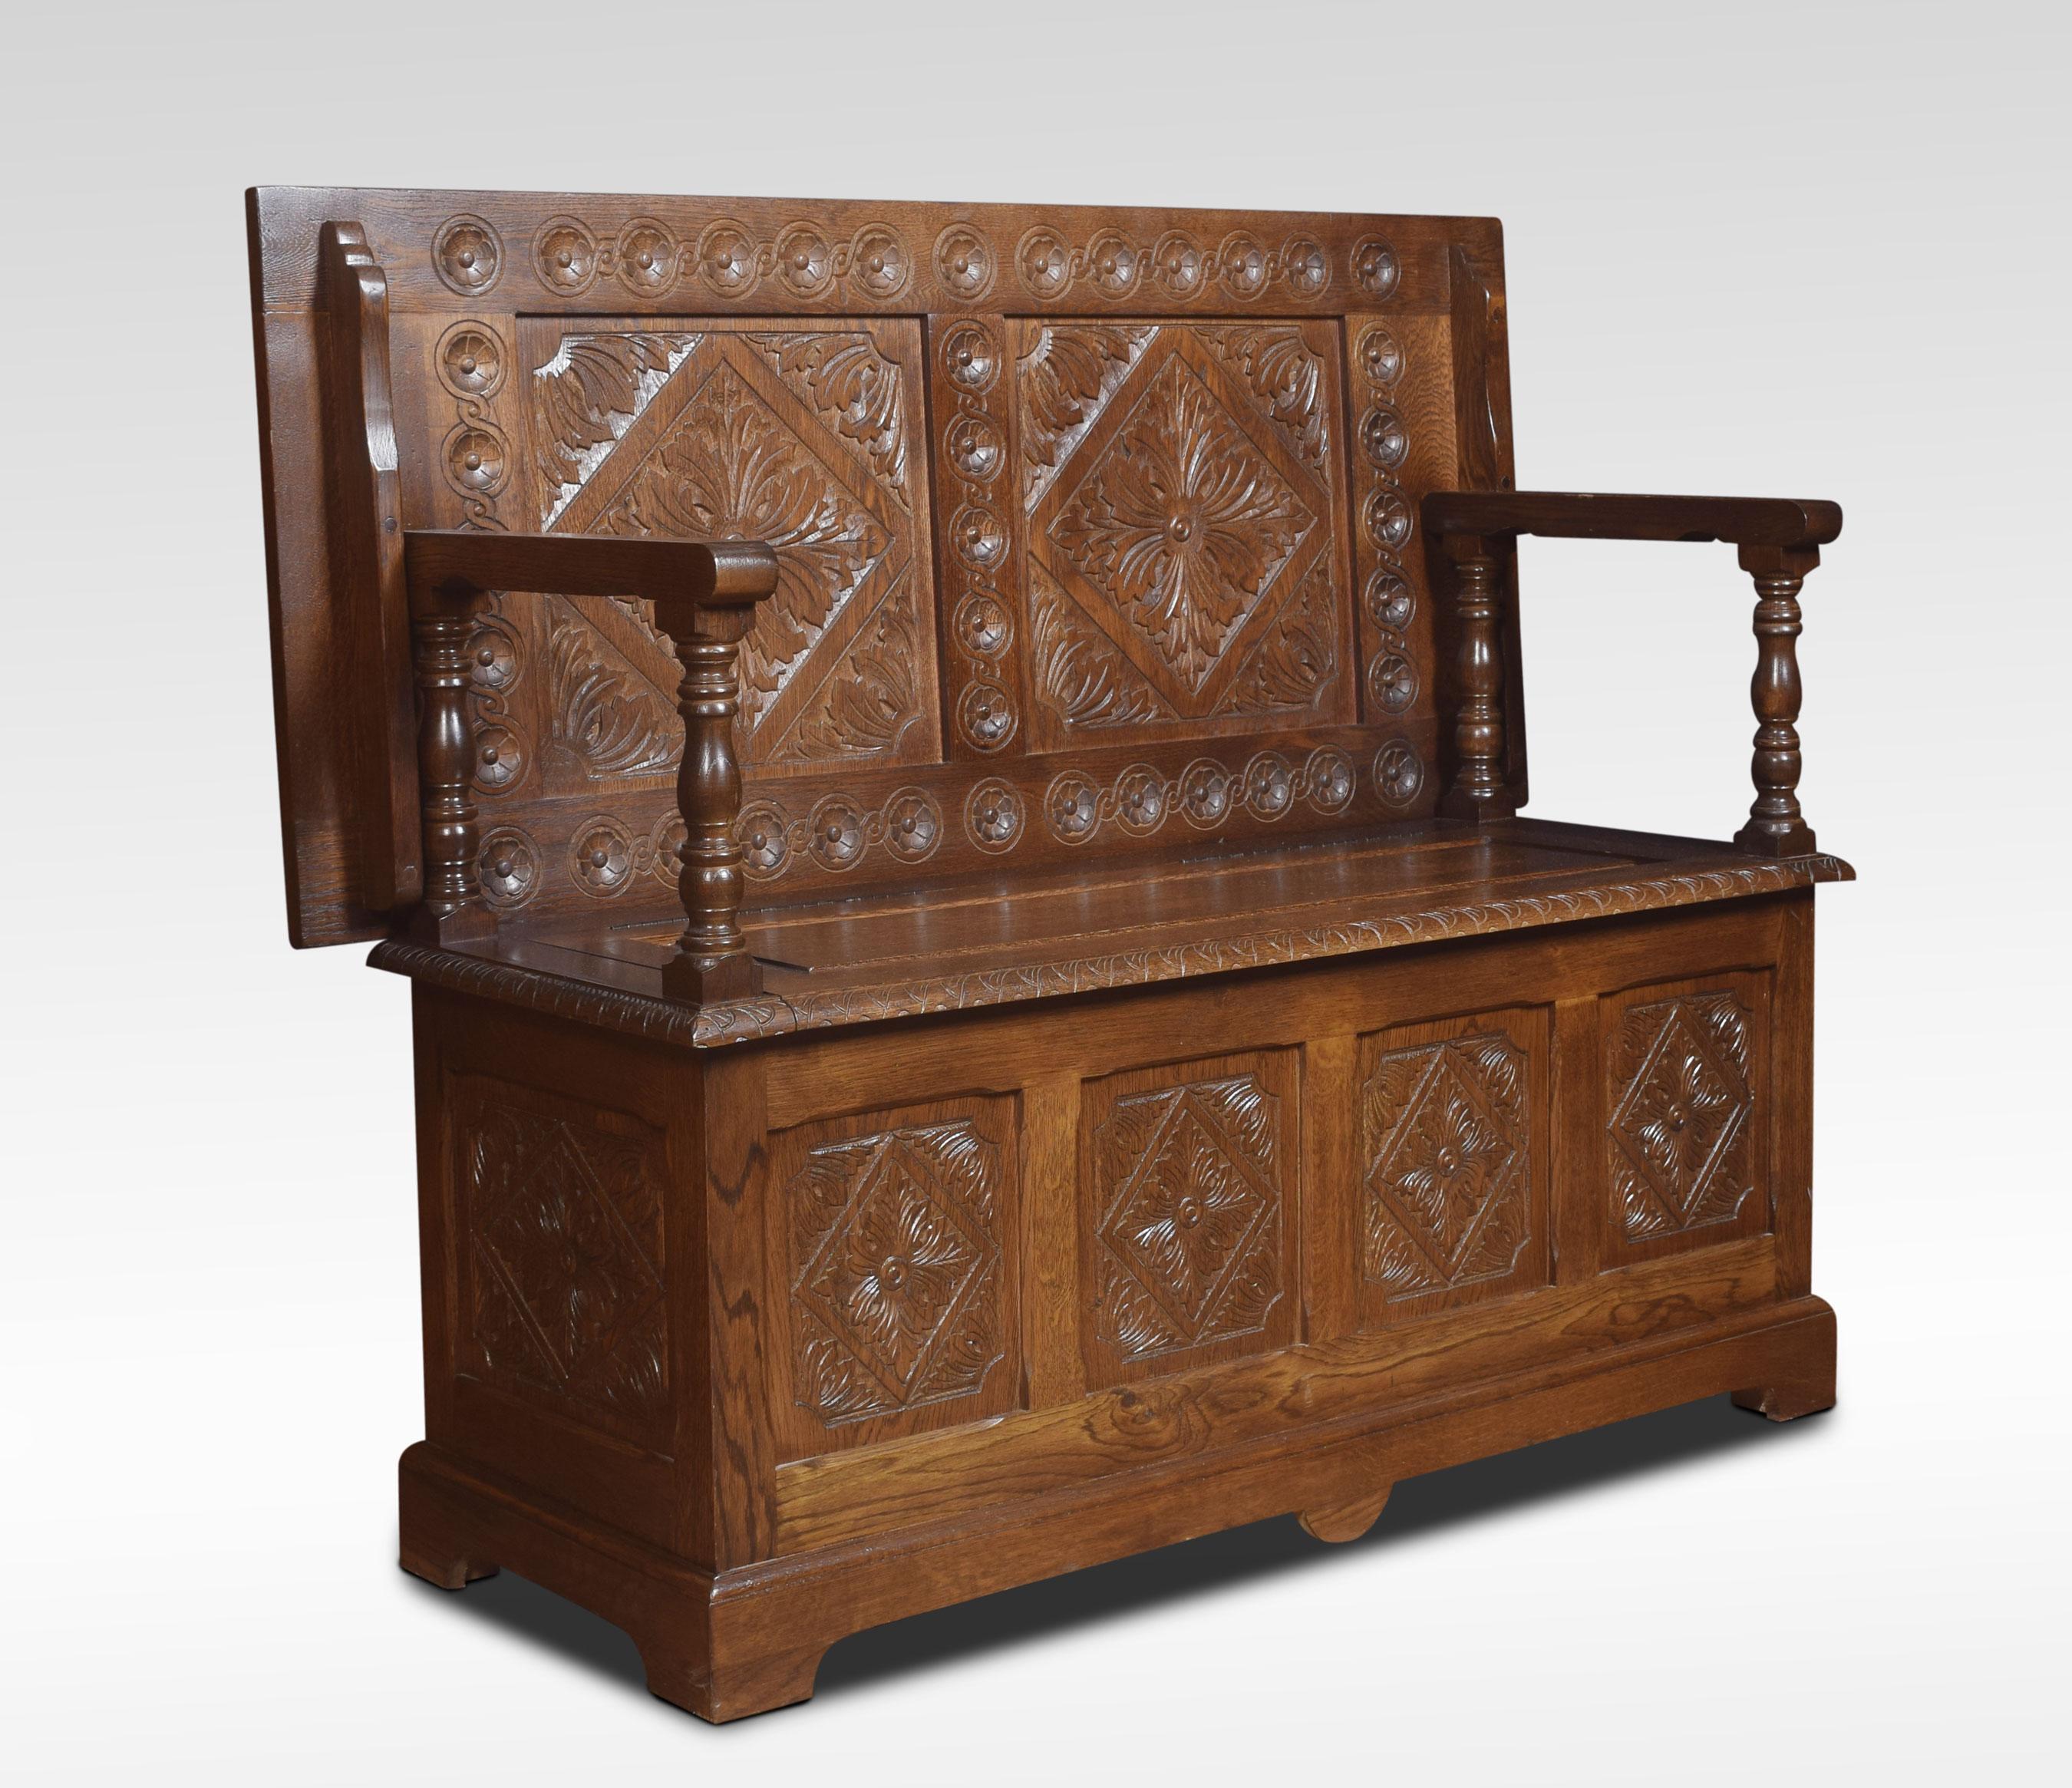 Carved oak monk’s bench/hall bench. The solid oak hinged top with geometric design resting on raised arms with turned uprights. The solid oak seat is hinged and opens to reveal uninterrupted storage space inside.
Dimensions:
Height 39.5 inches